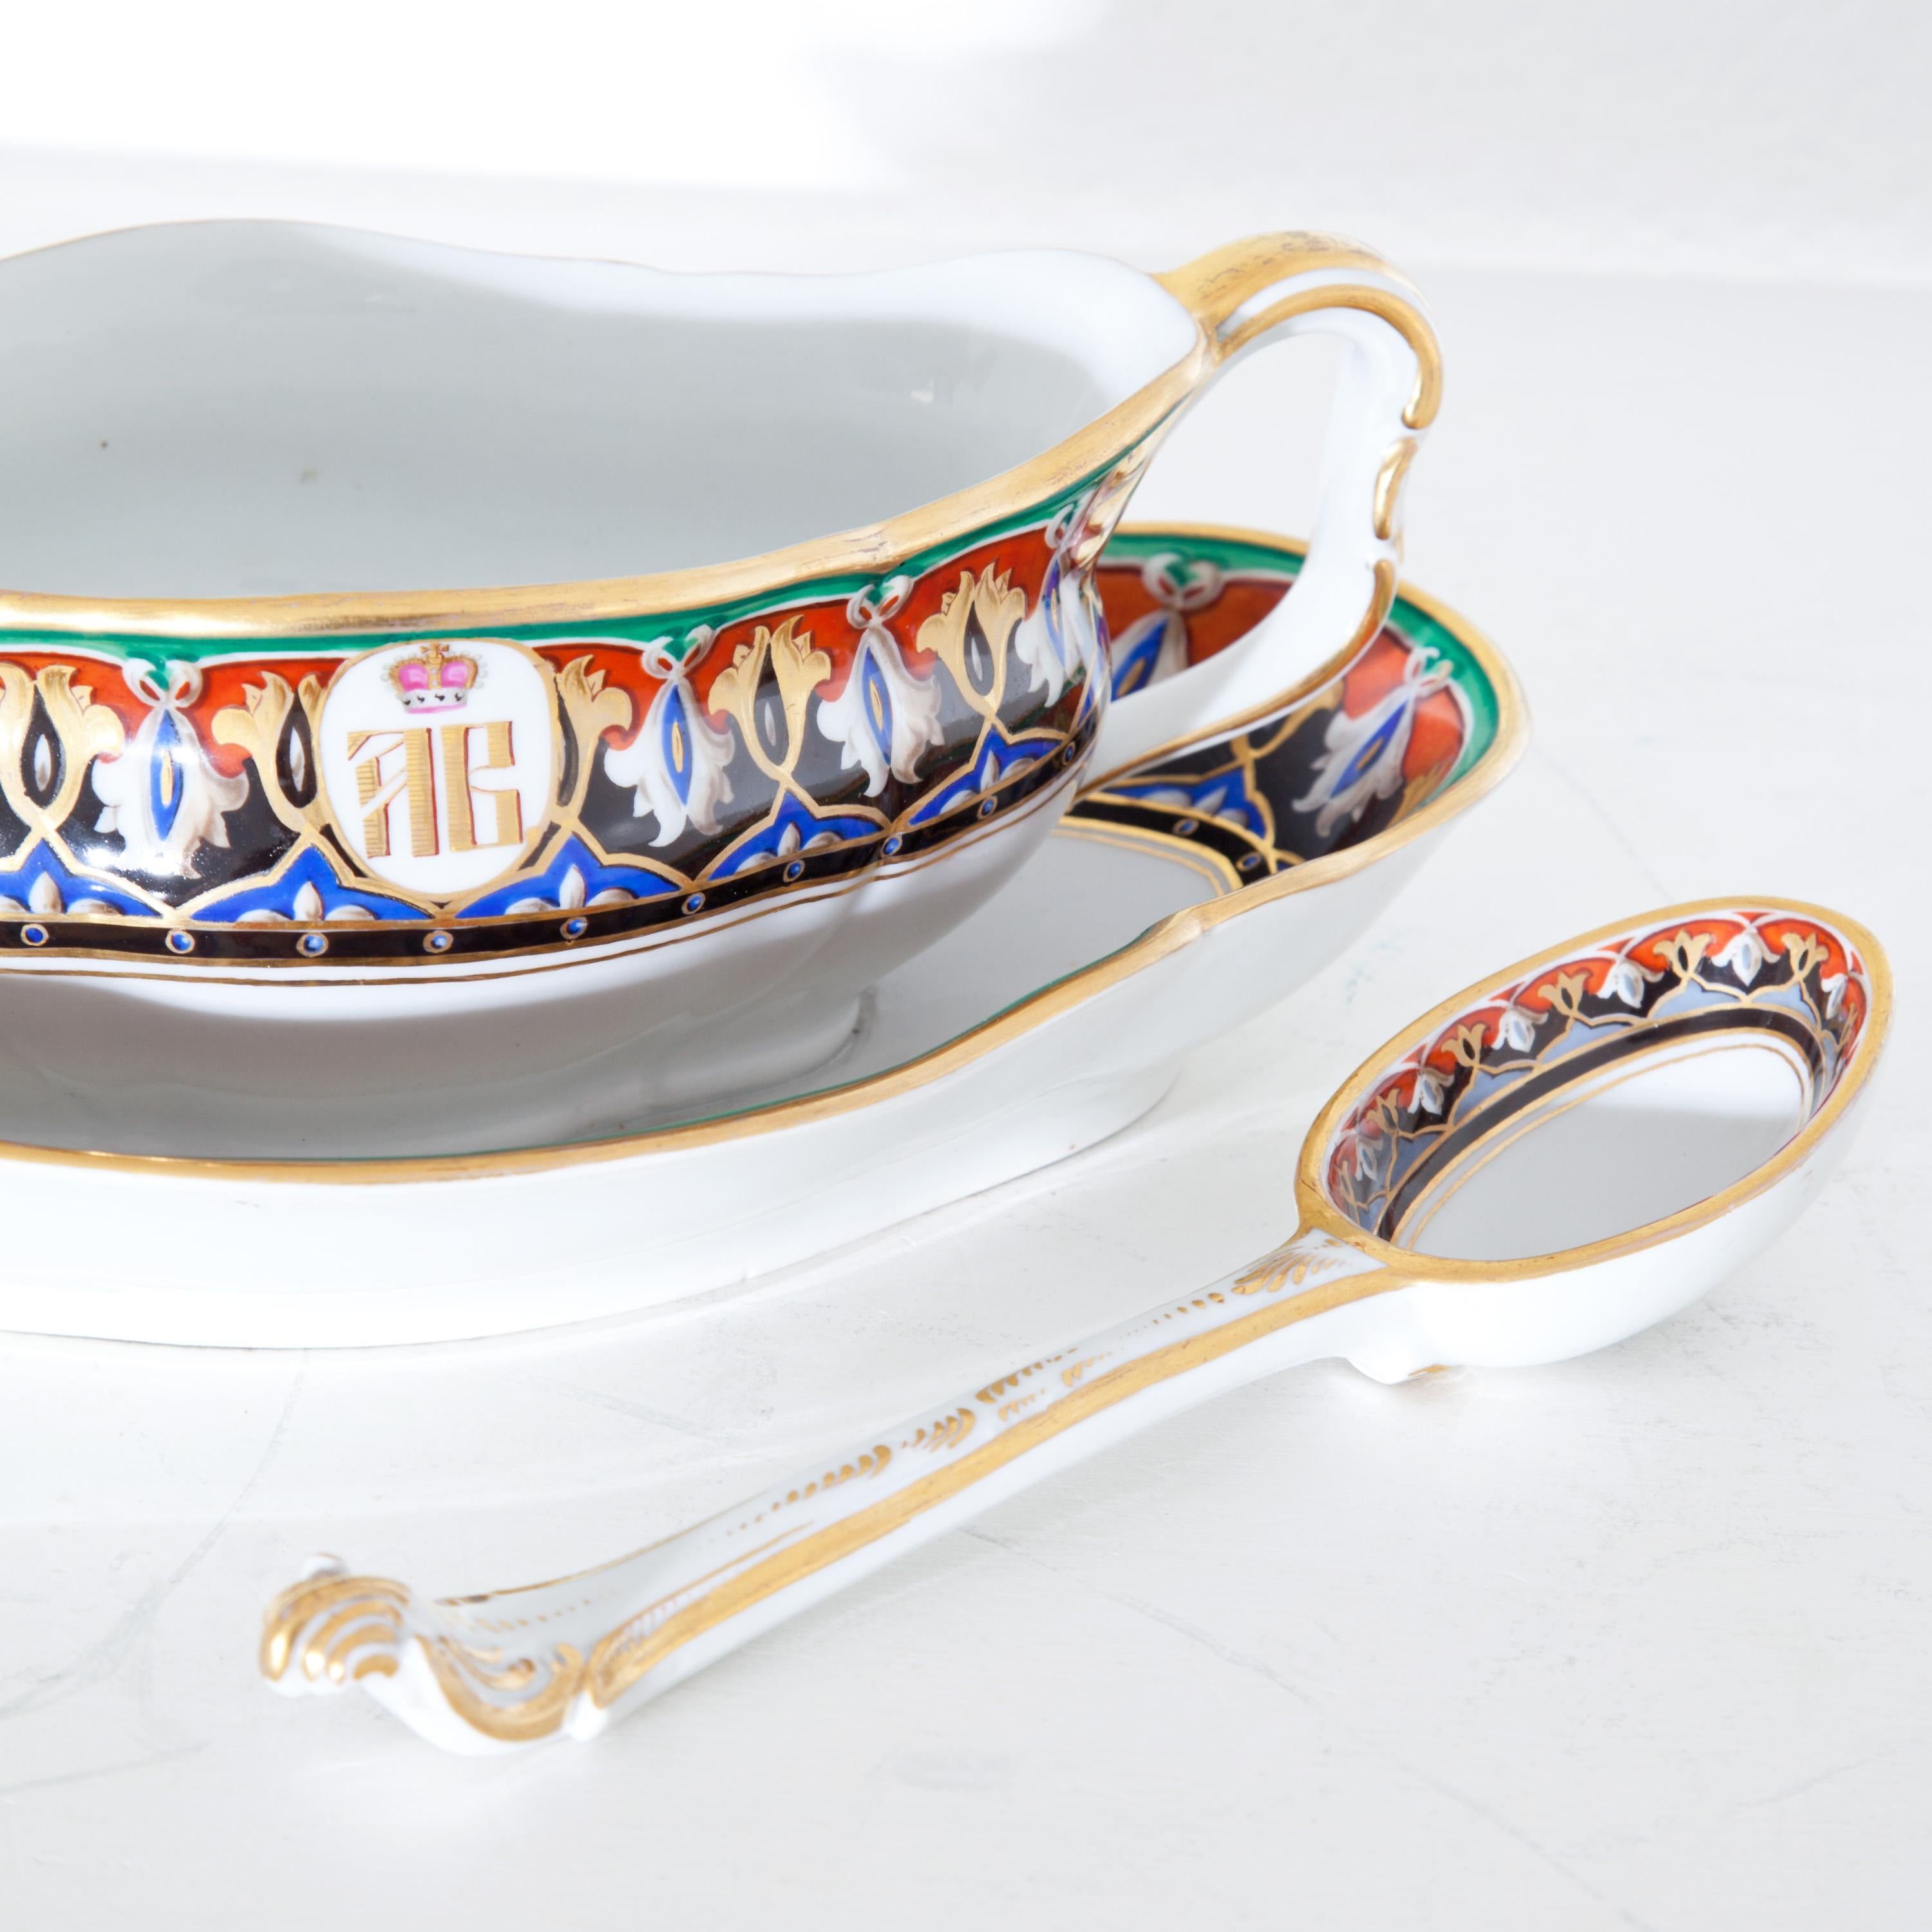 Porcelain Gravy Boat and Spoon with Monogram WA, KPM, Berlin, Germany, 1849-1870 For Sale 6